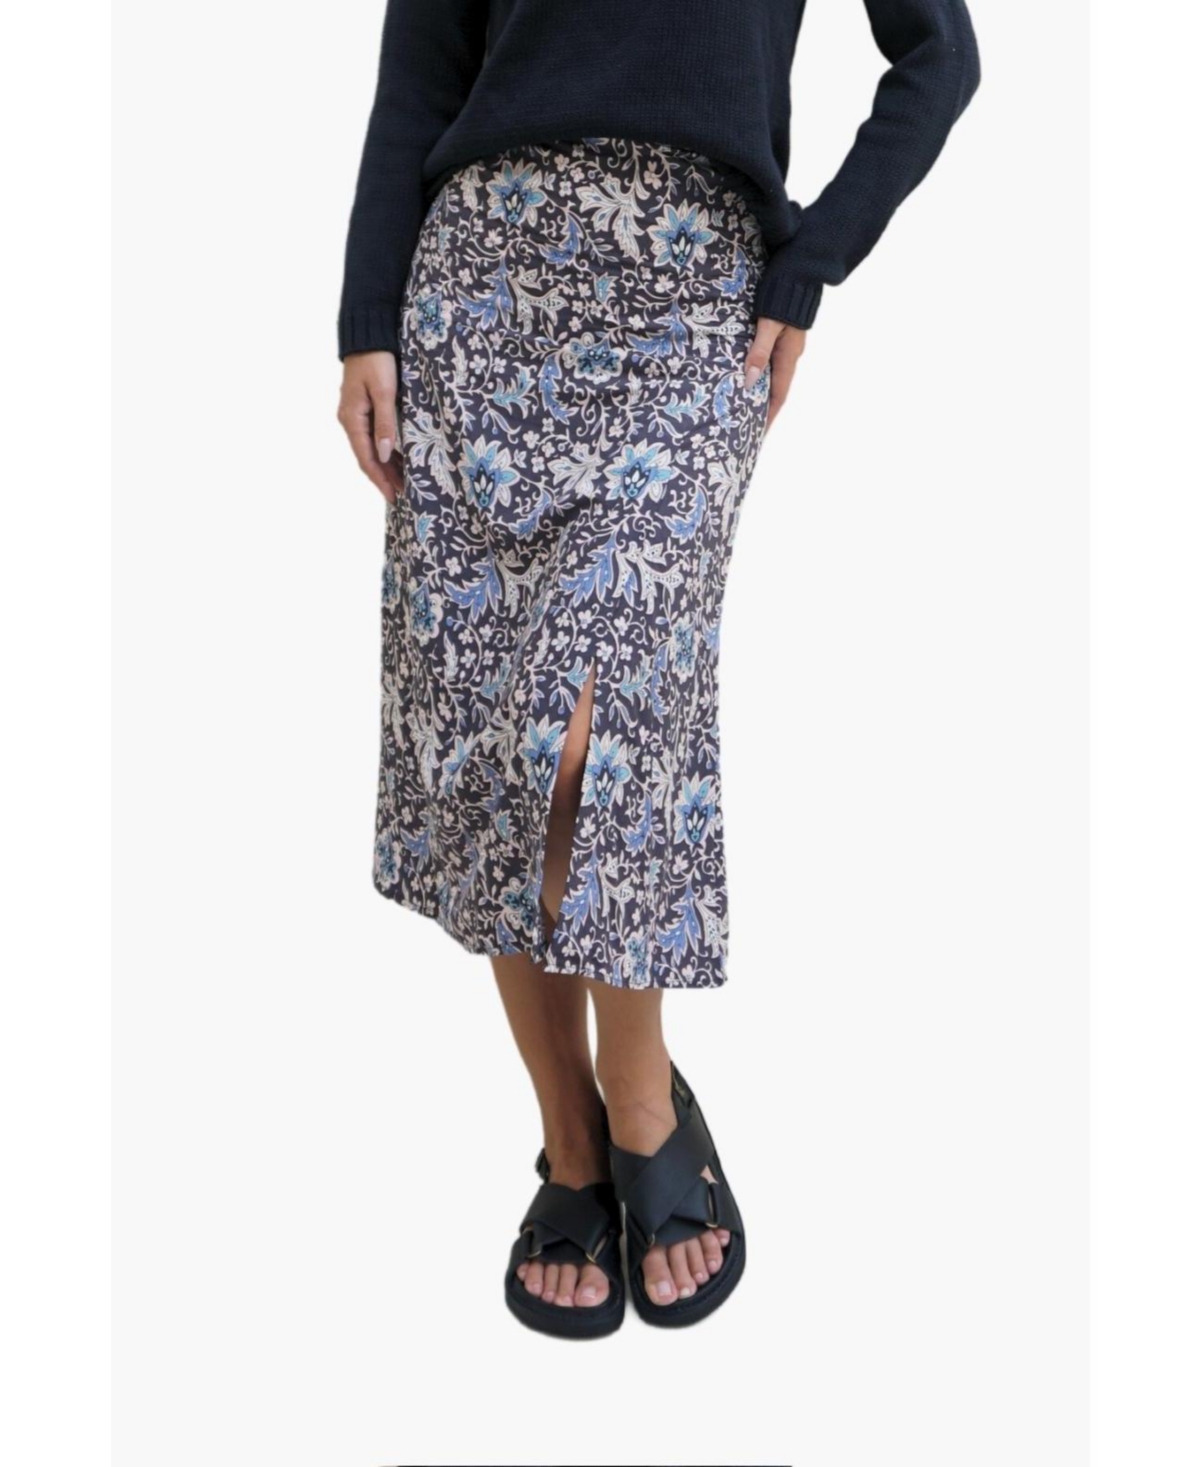 Women's Floral Printed Avery Midi Skirt in Navy - Navy floral print